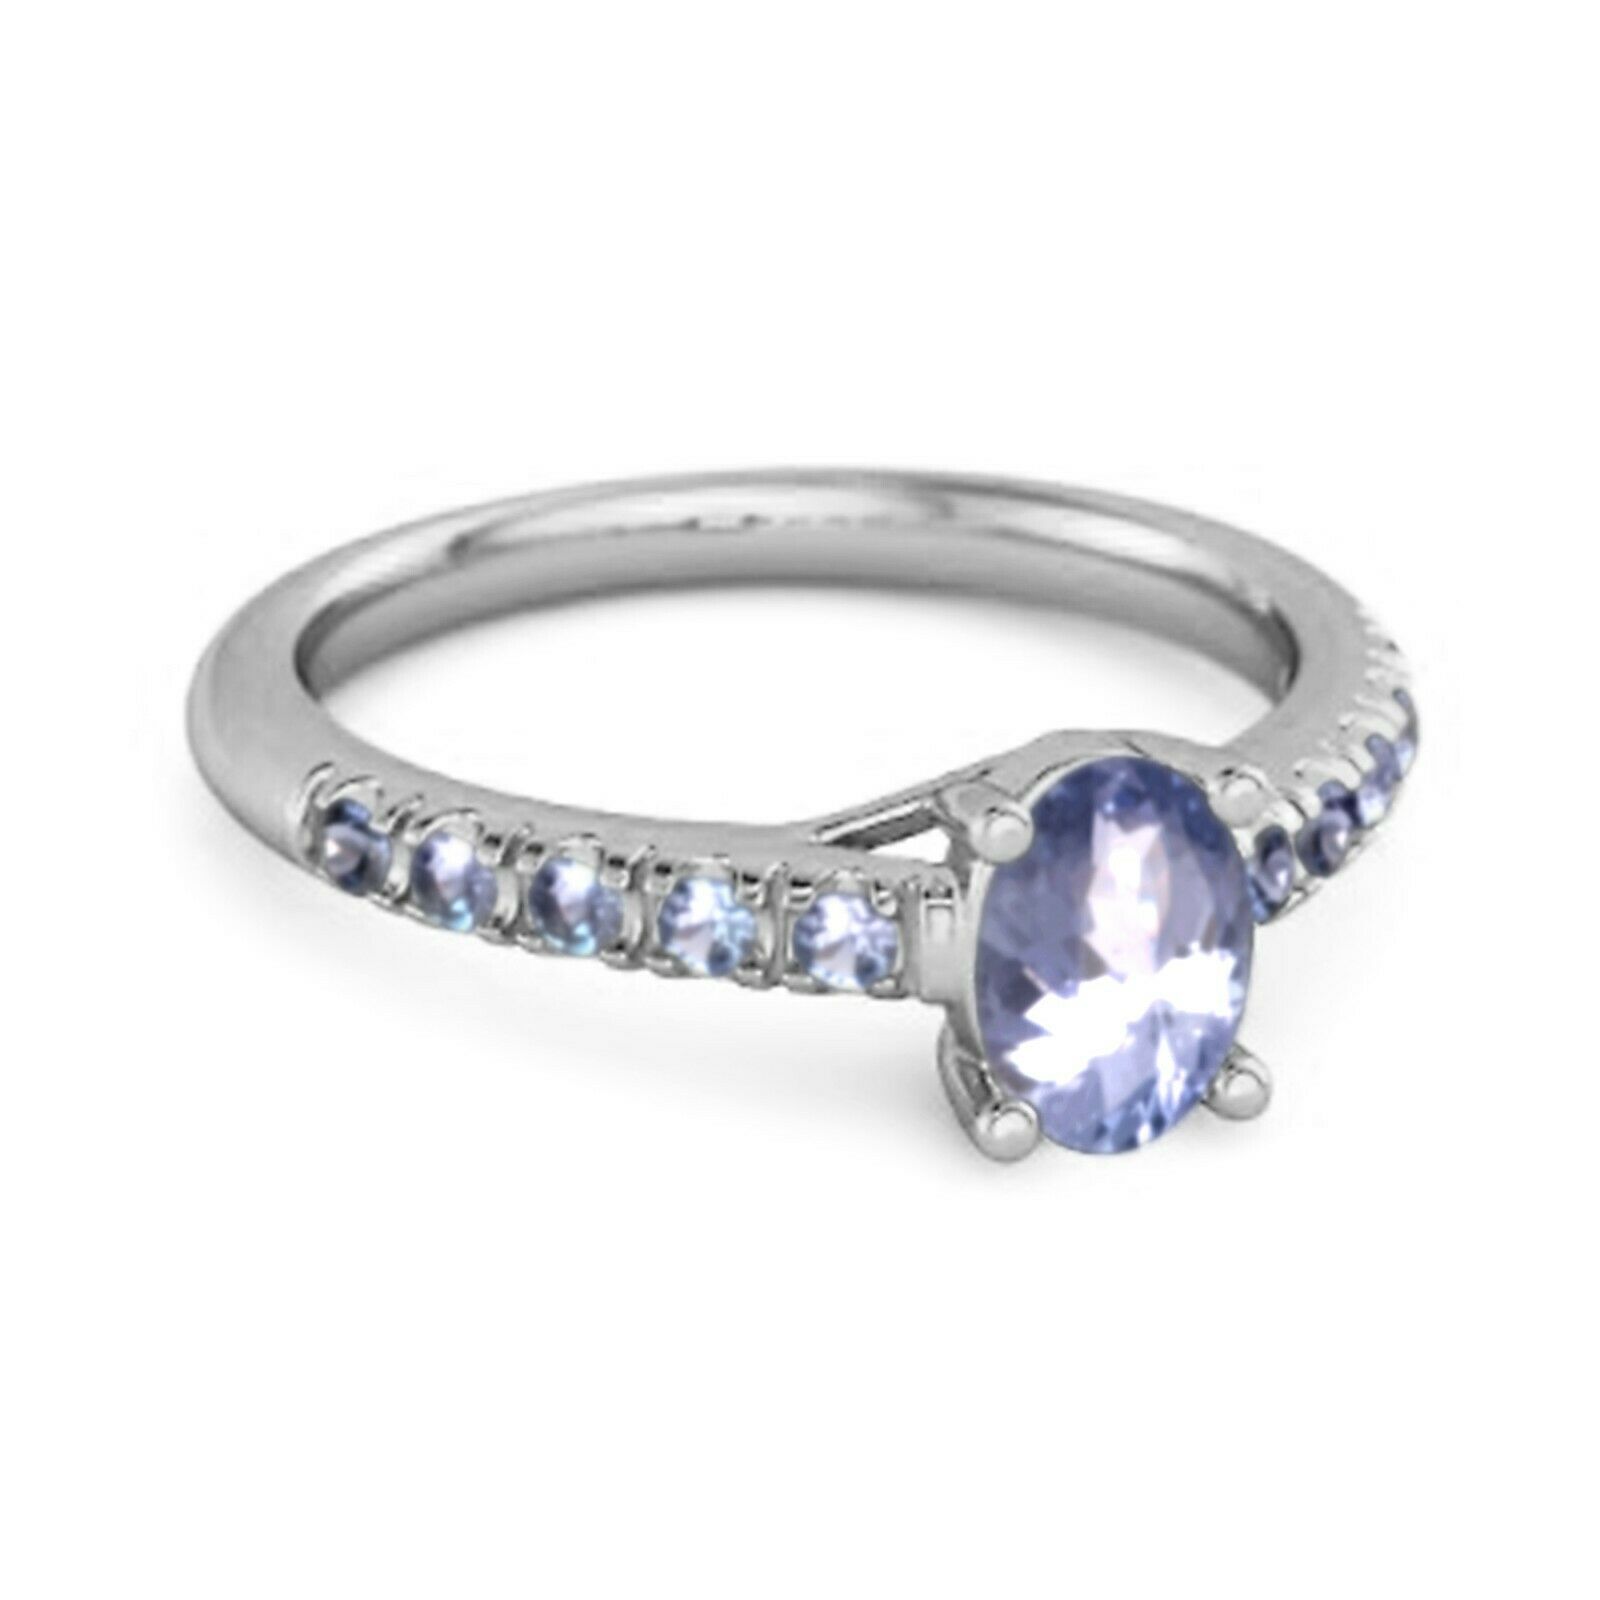 Shine Jewel - Solitaire 1.70 ctw oval  tanzanite cut 10k white gold  floating halo ring